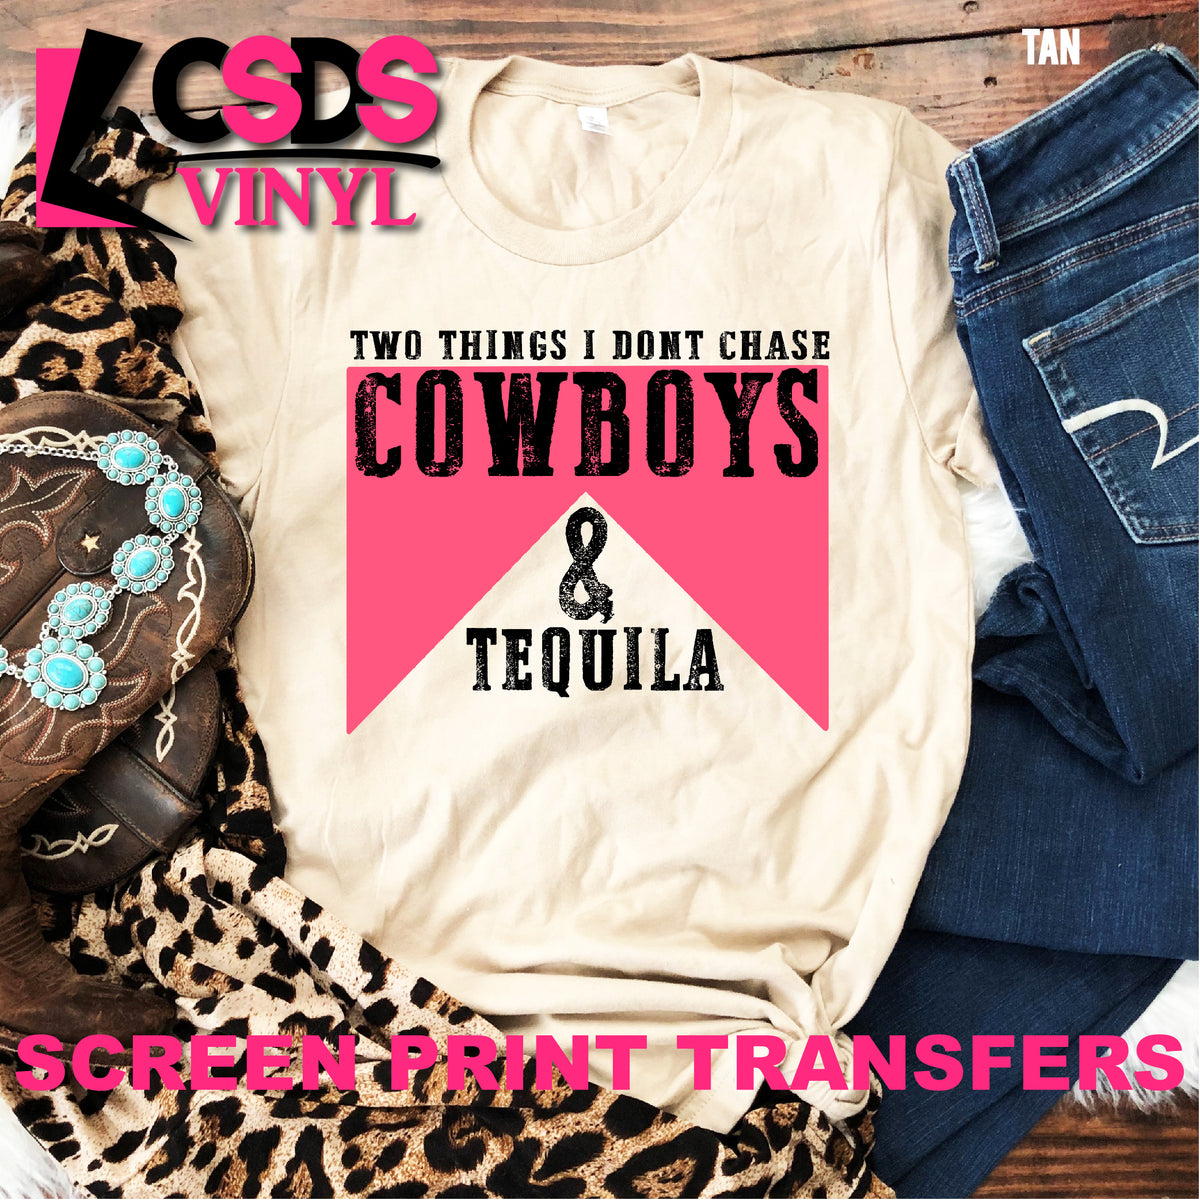 Screen Print Transfer - Two Things I don't Chase Cowboys & Tequila - F ...